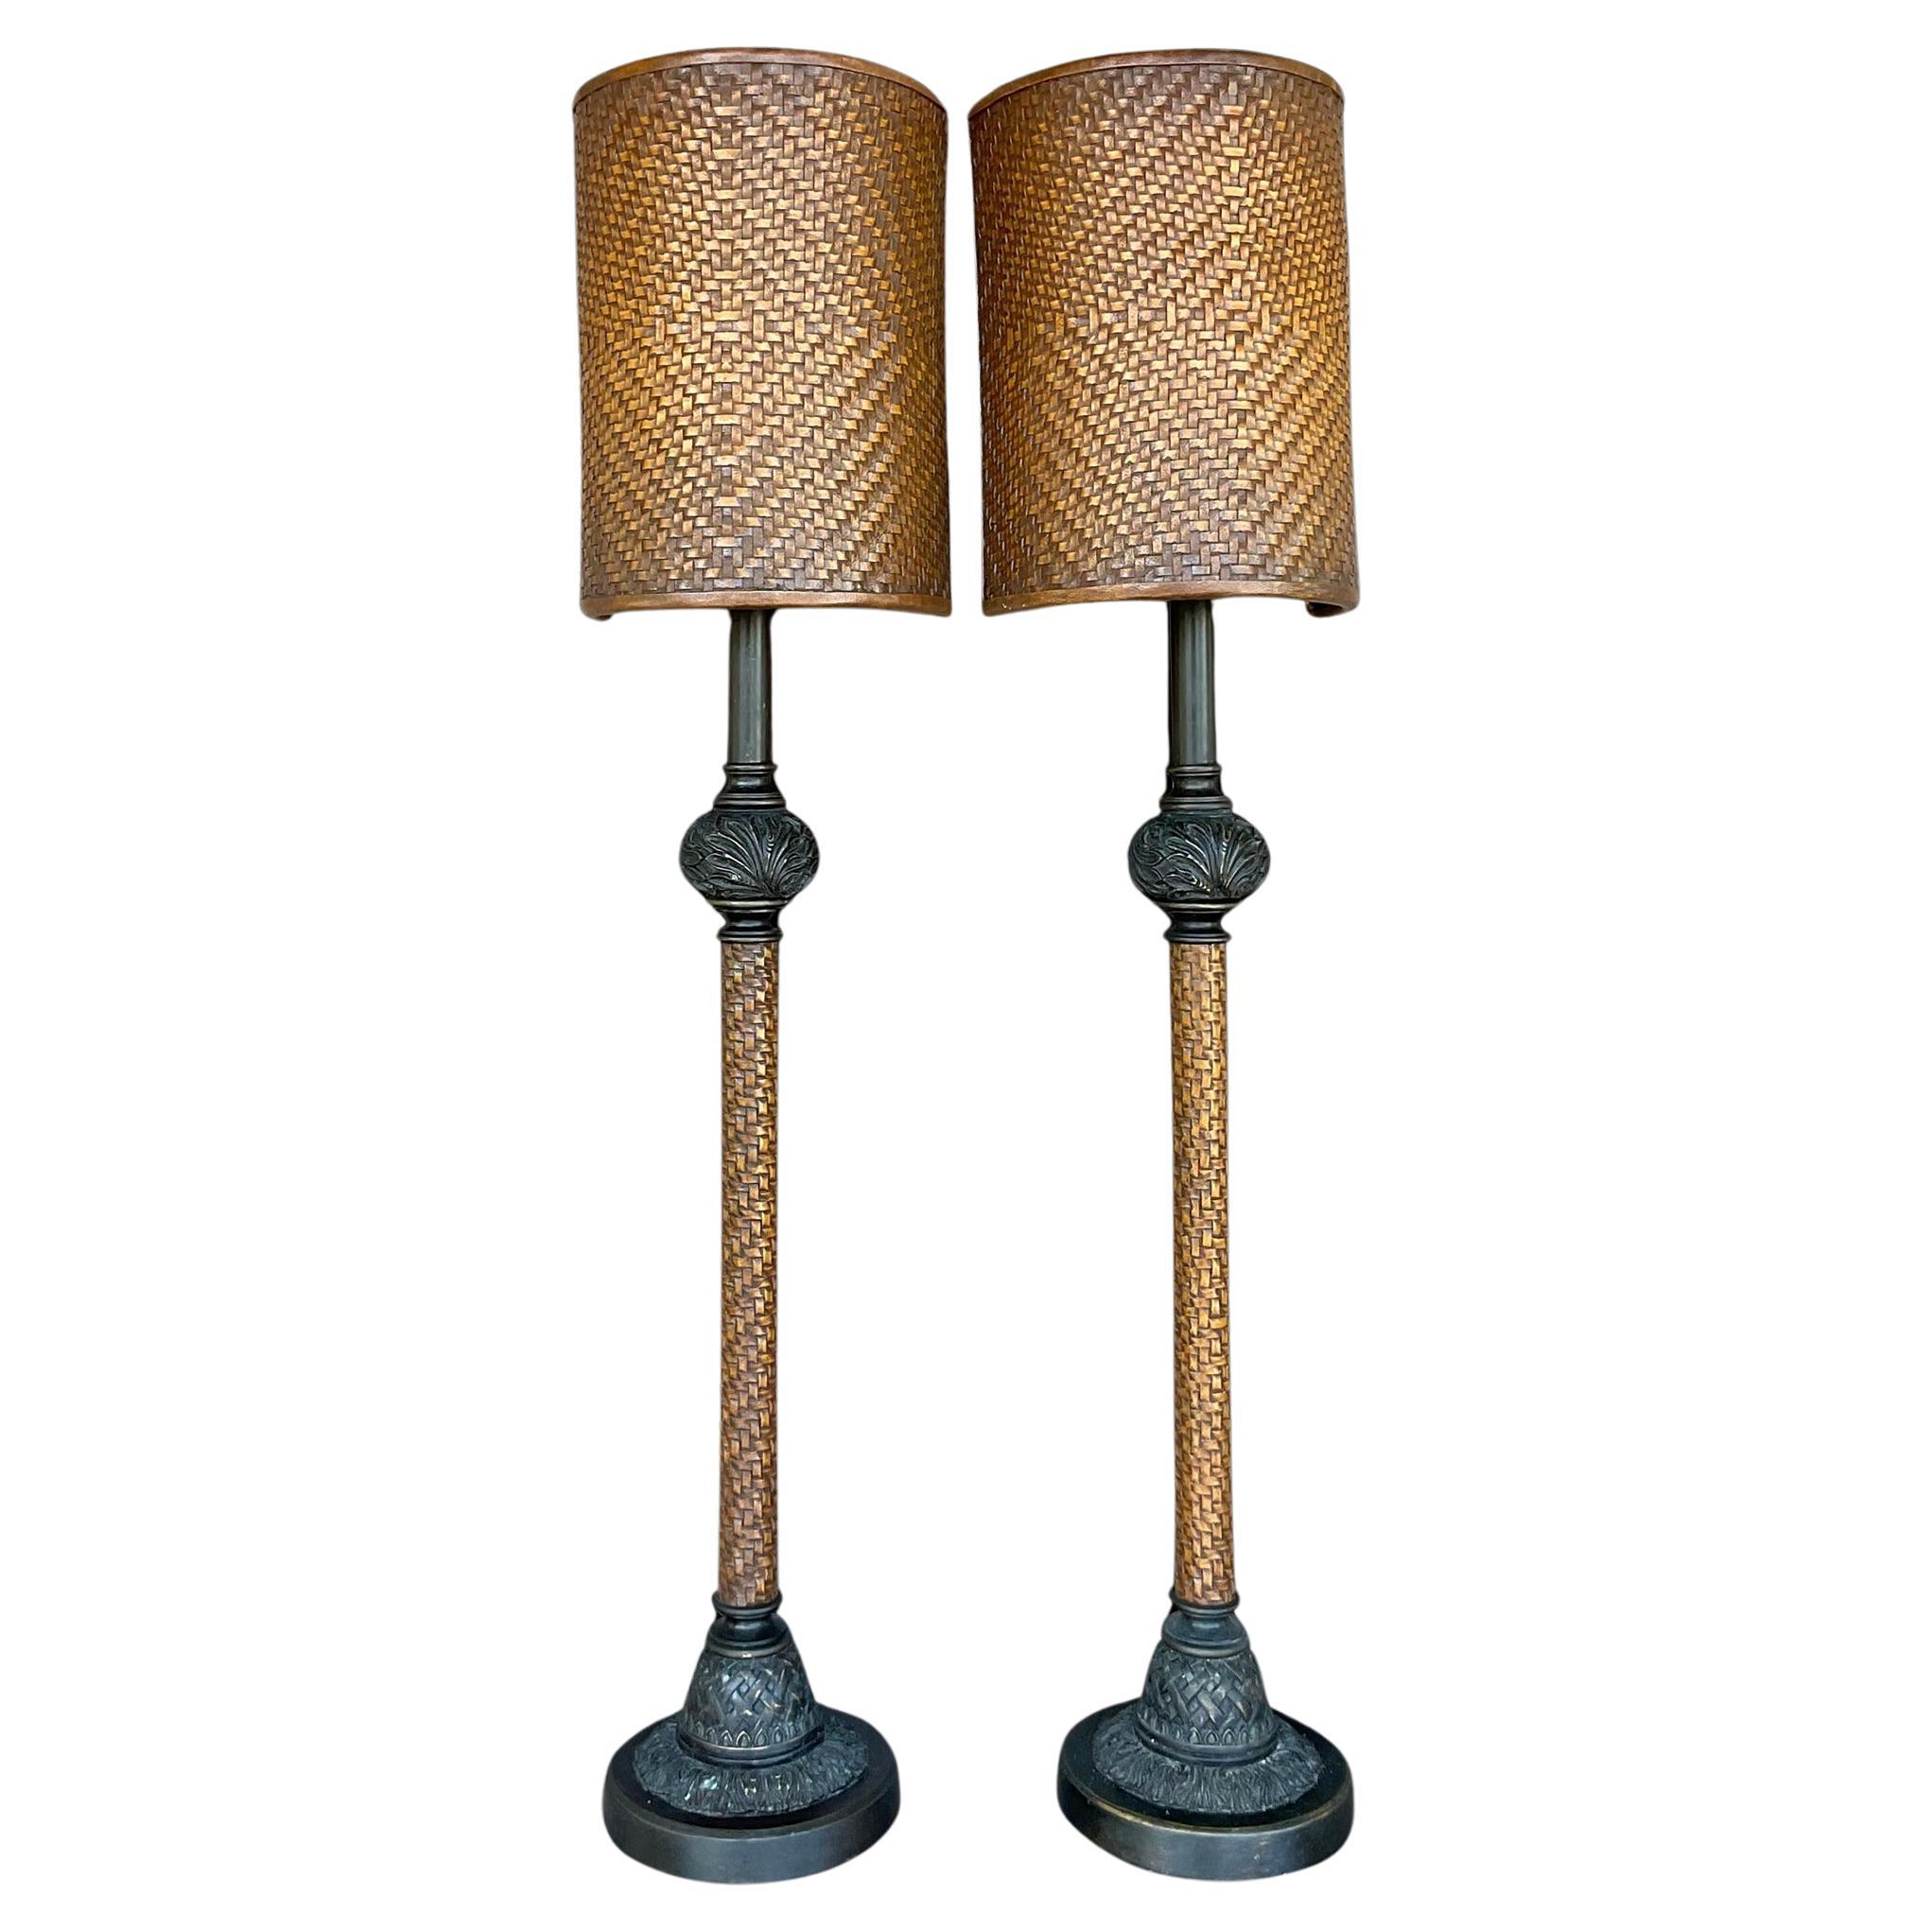 Vintage Boho Woven Leather Candlestick Lamps - a Pair